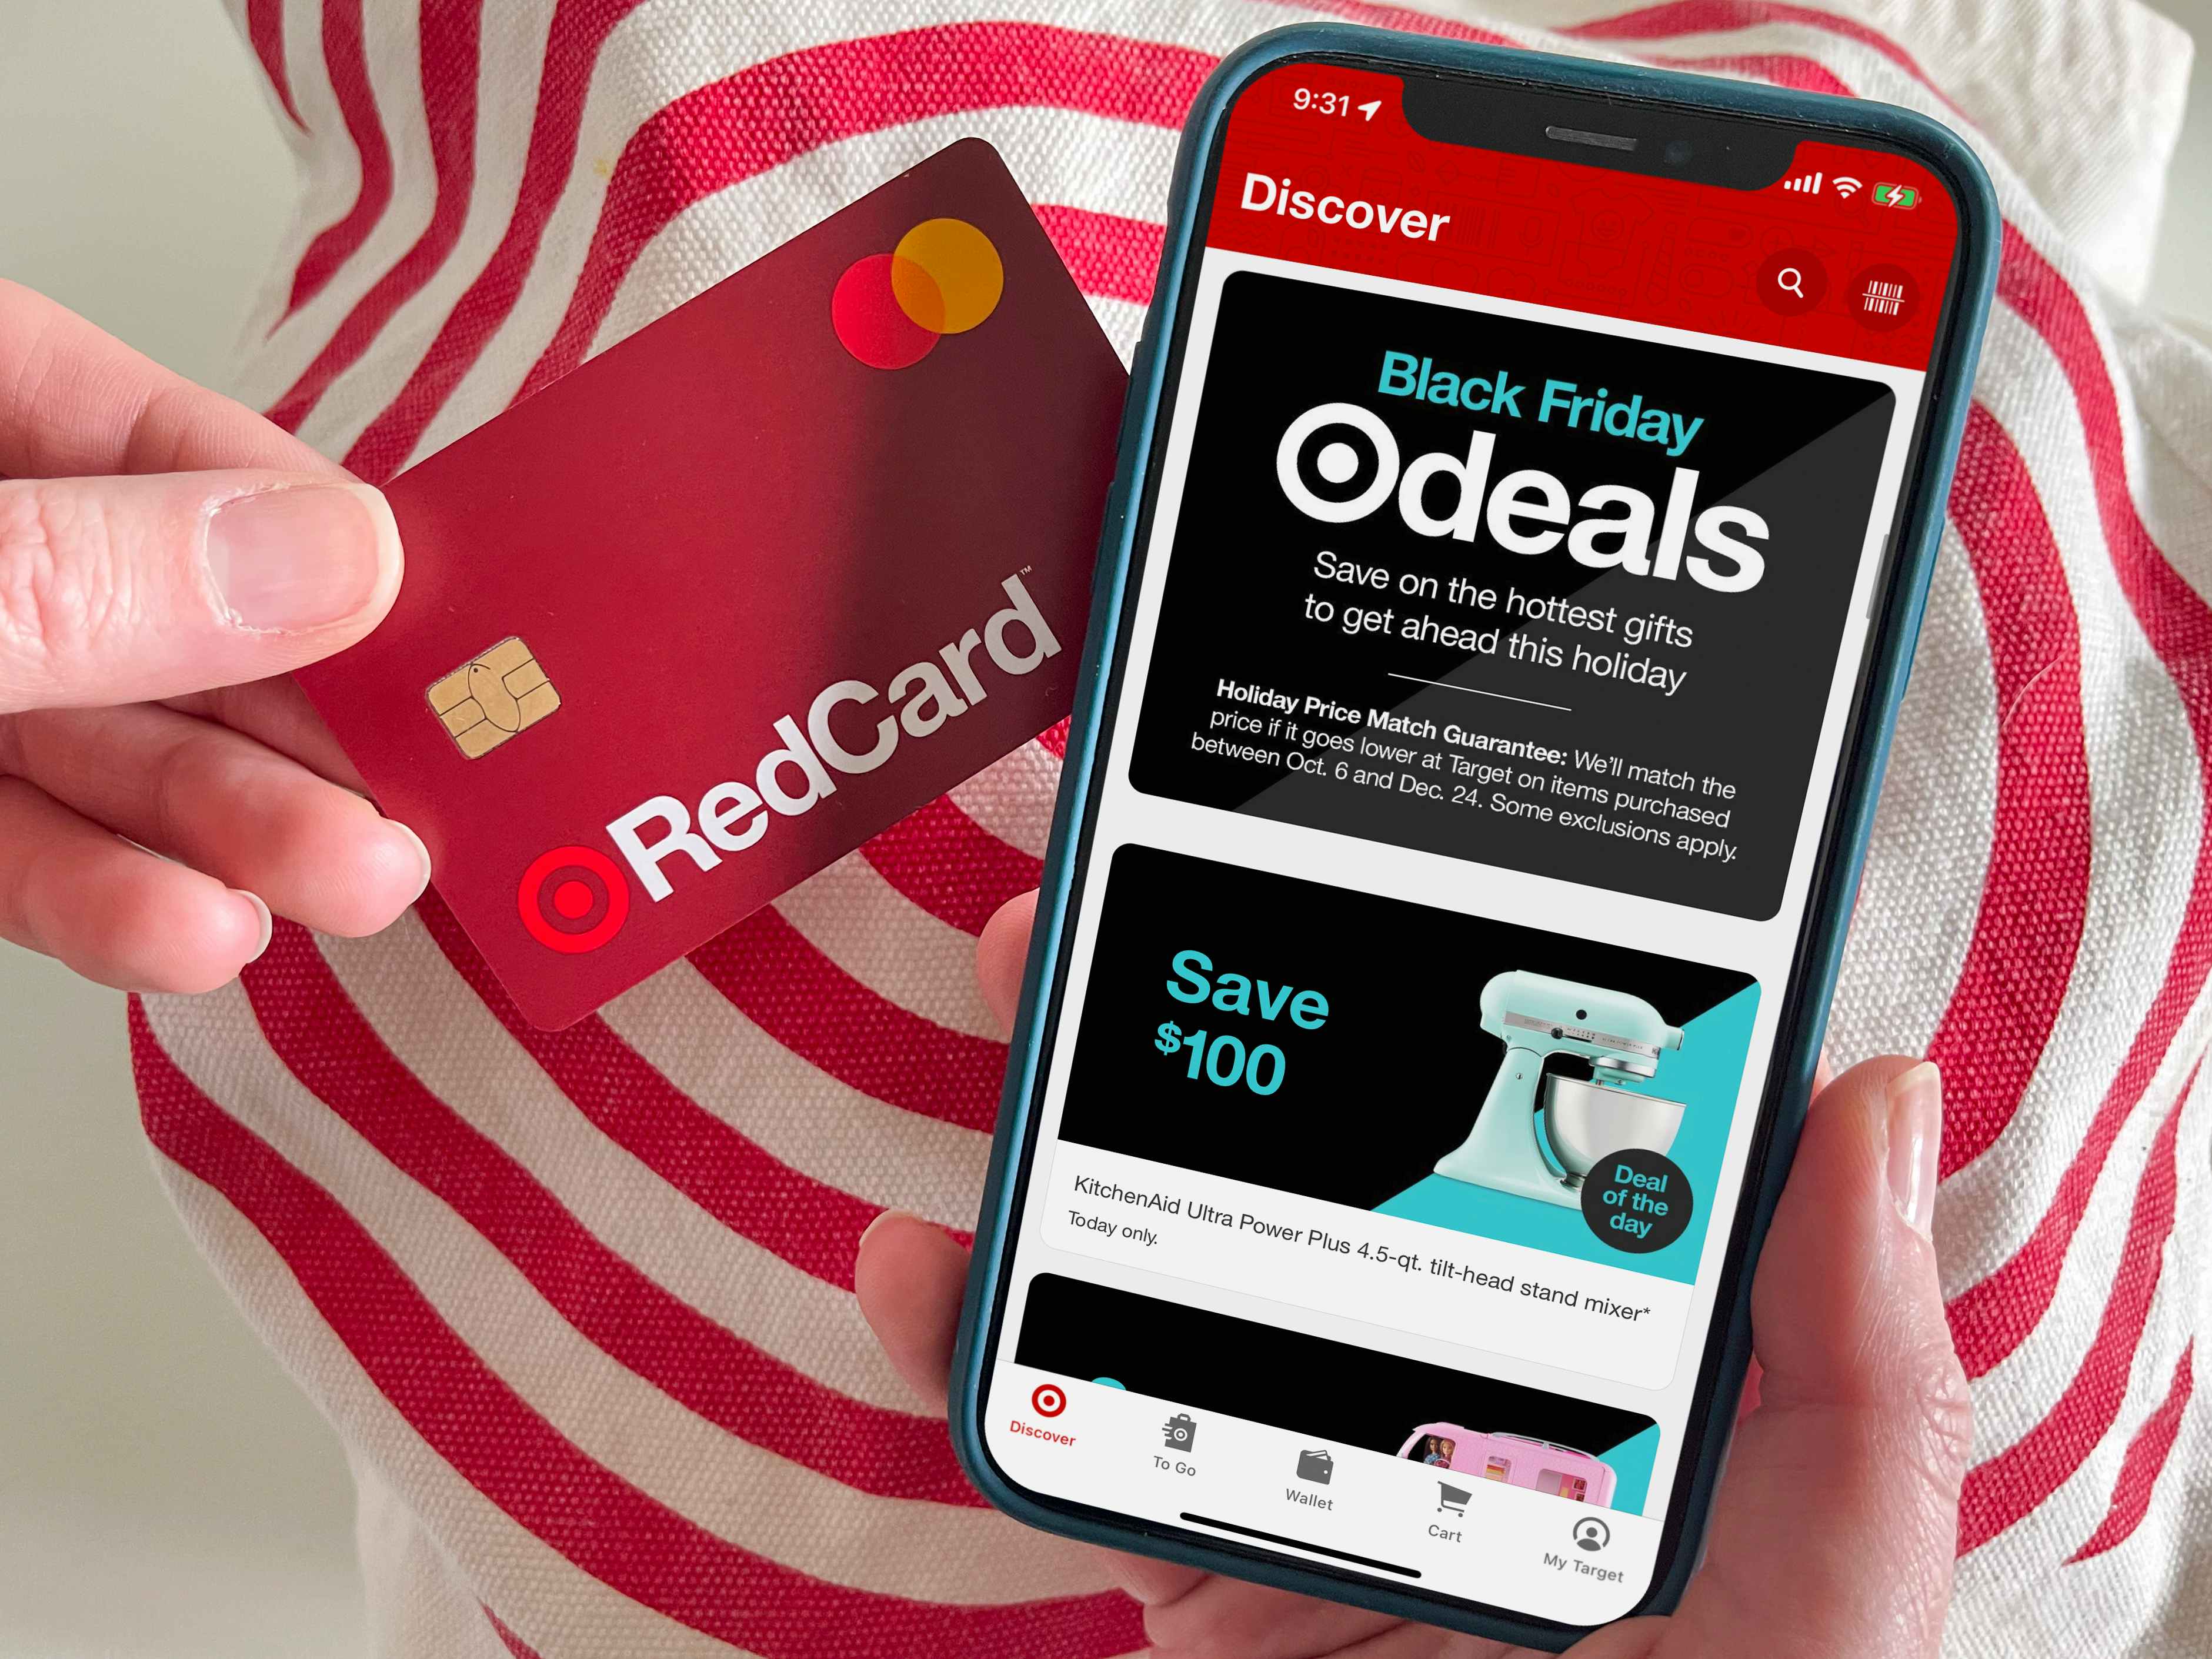 A person holding a black friday credit card next to the Target app with Black Friday deals on the screen.